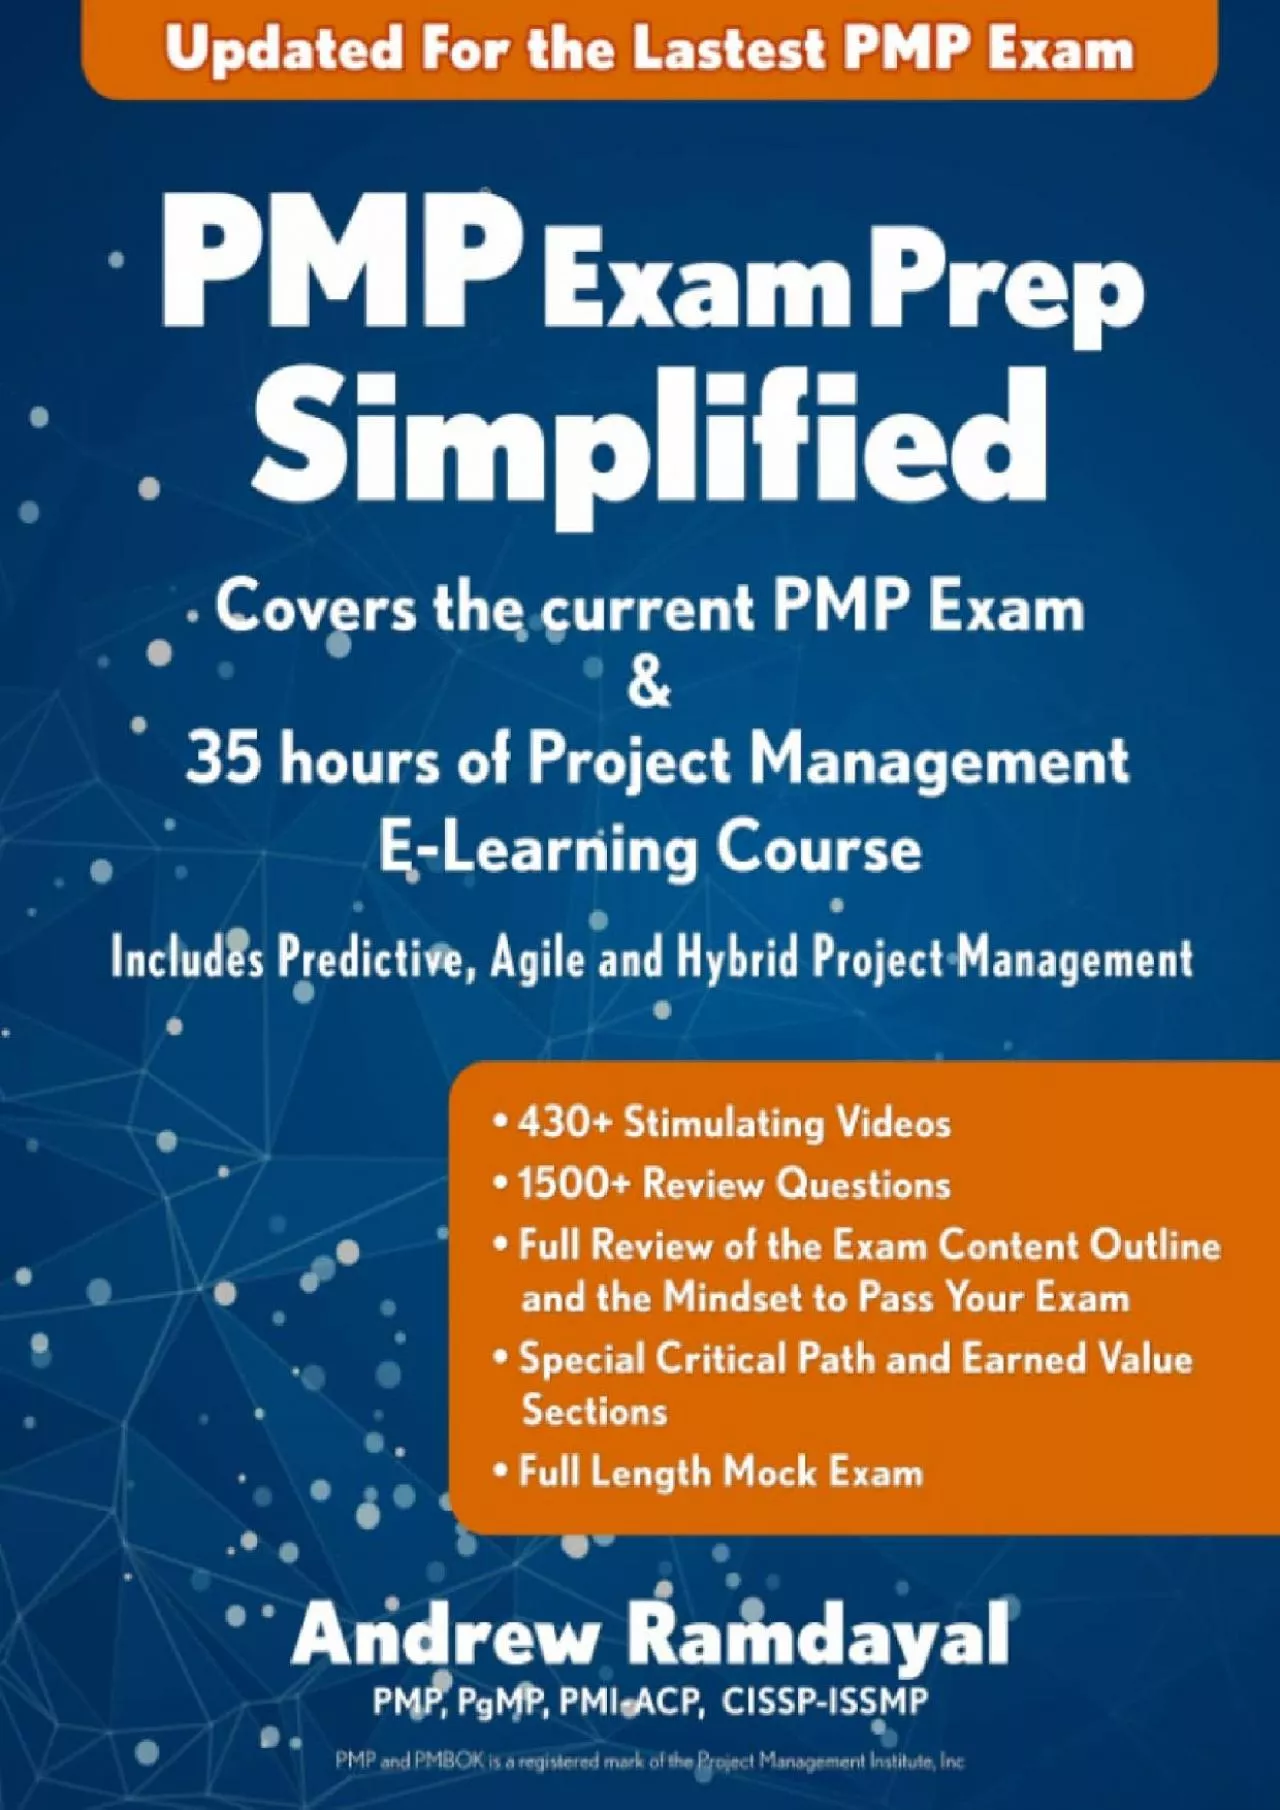 [EBOOK] PMP Exam Prep Simplified: Covers the Current PMP Exam and Includes a 35 Hours